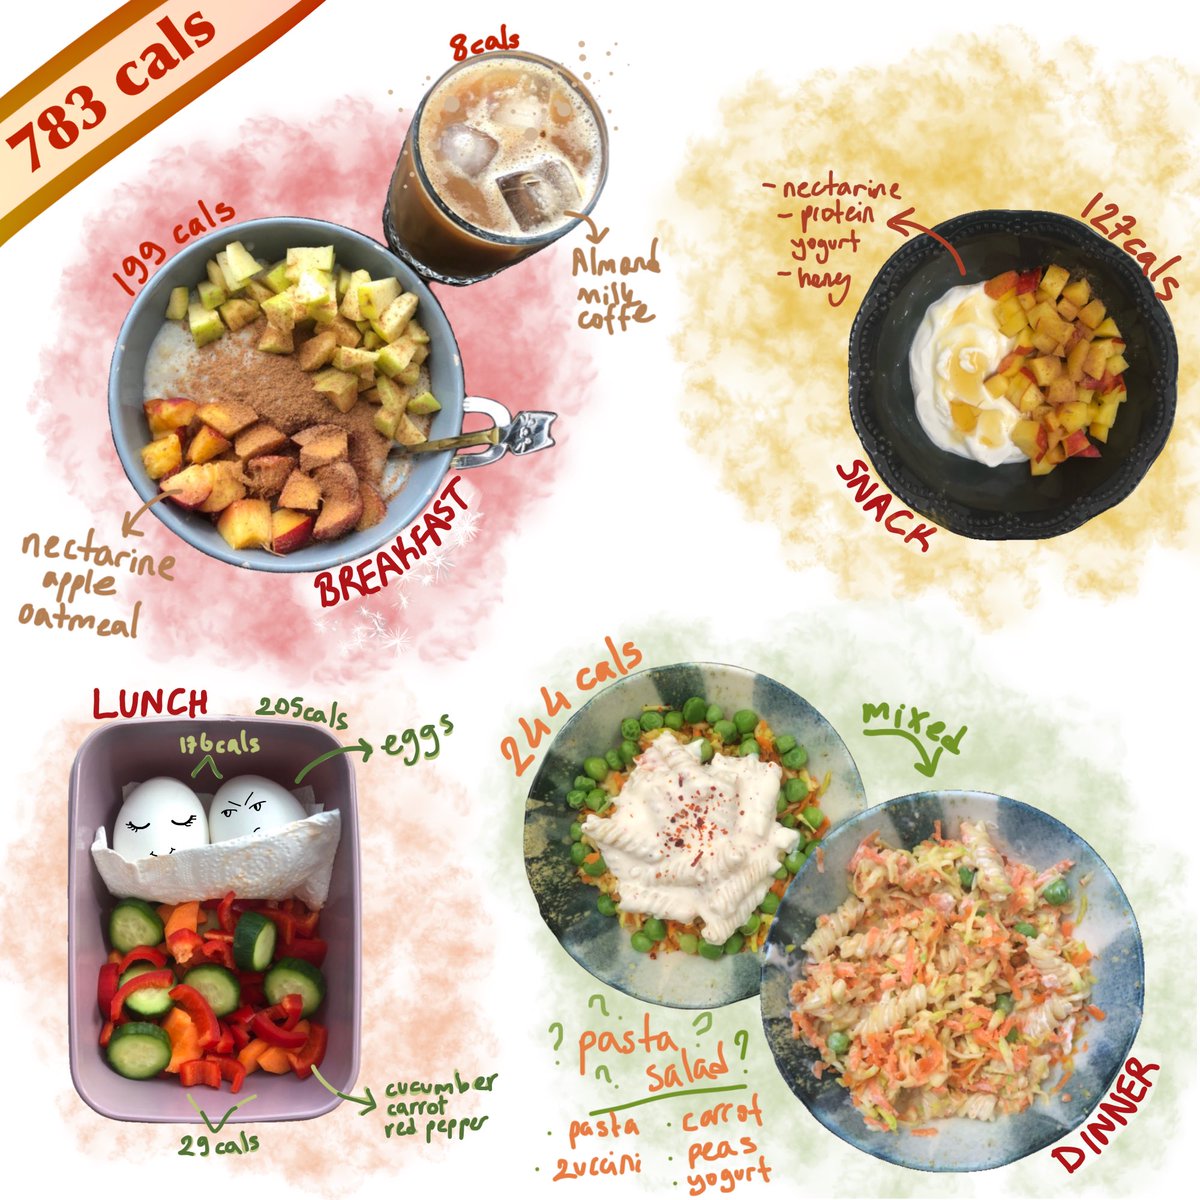 today’s meals!! protein was 55g total,, i was full all day + i had an iced americano at school that i didnt take a pic of